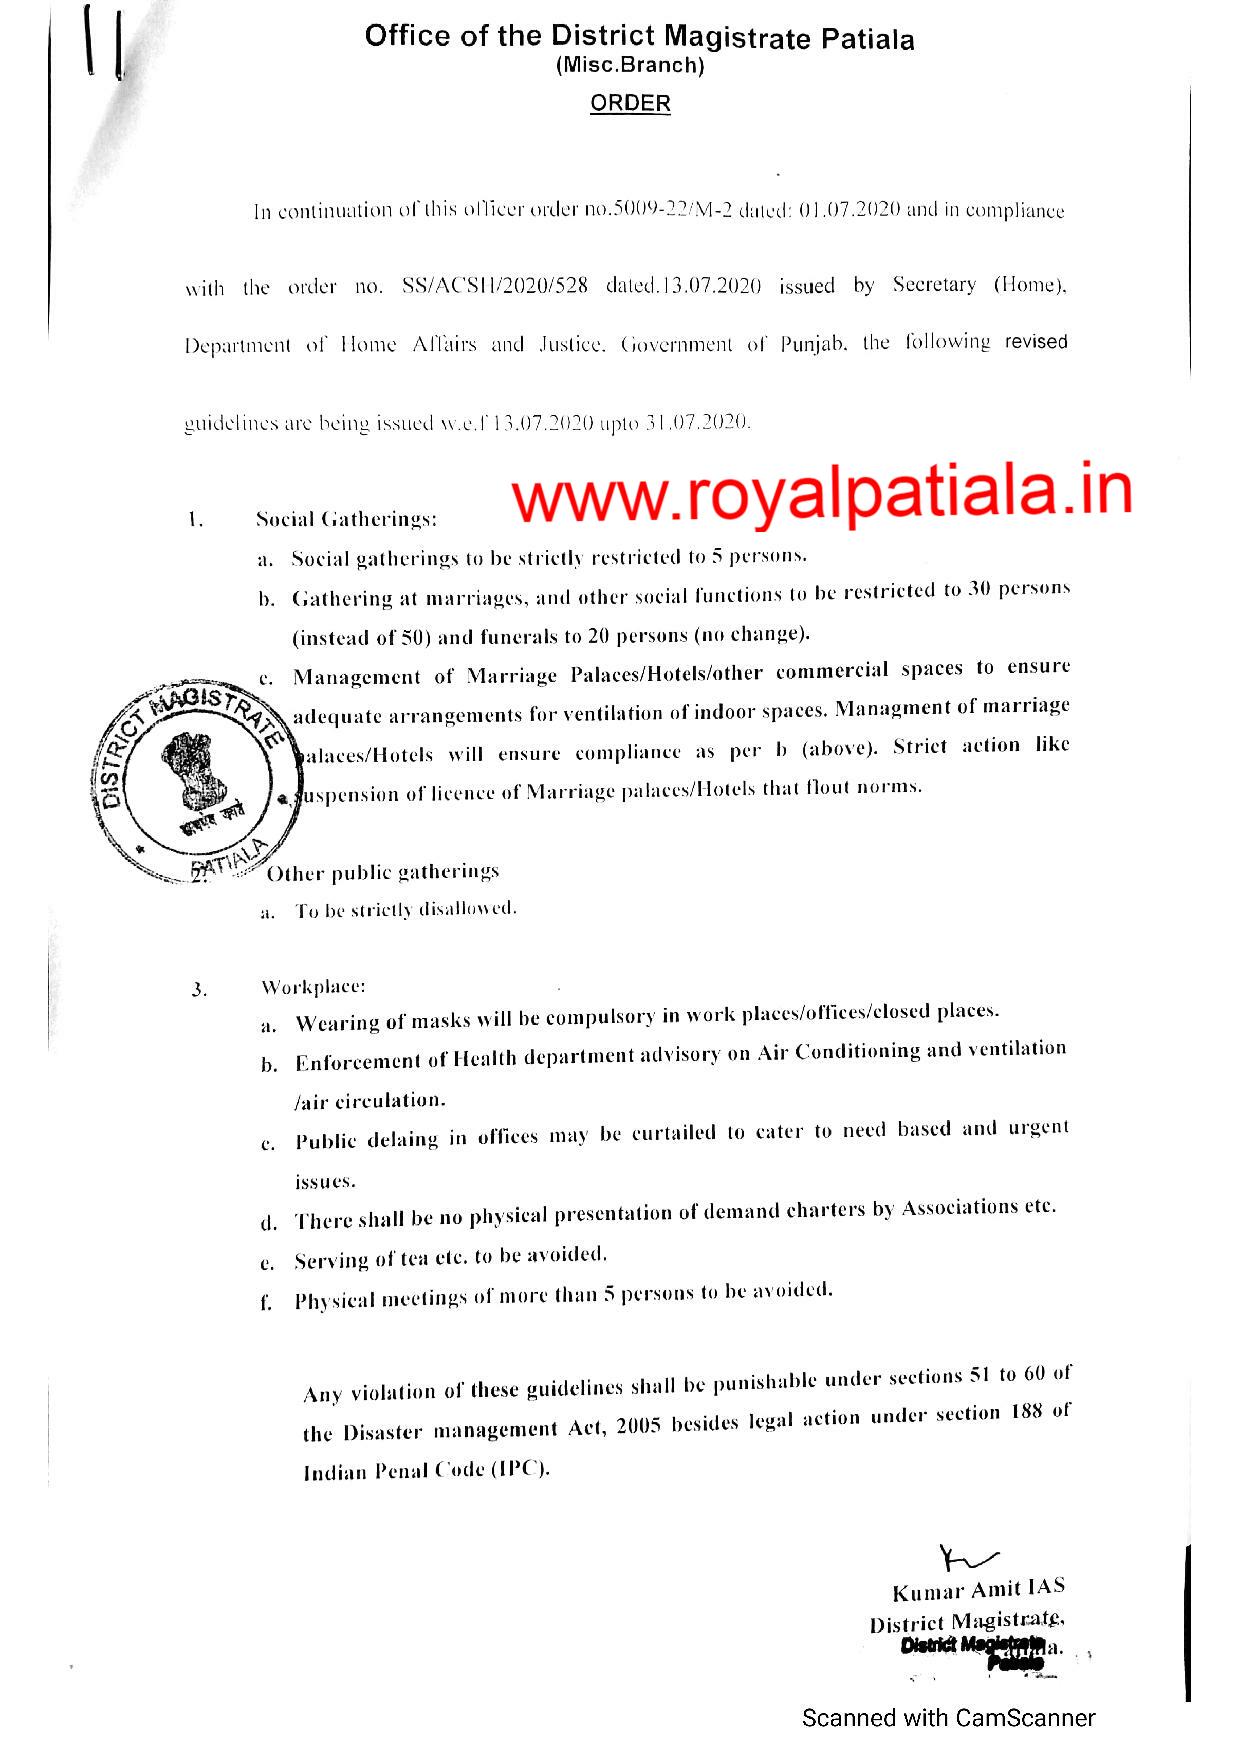 DC Patiala issues new orders